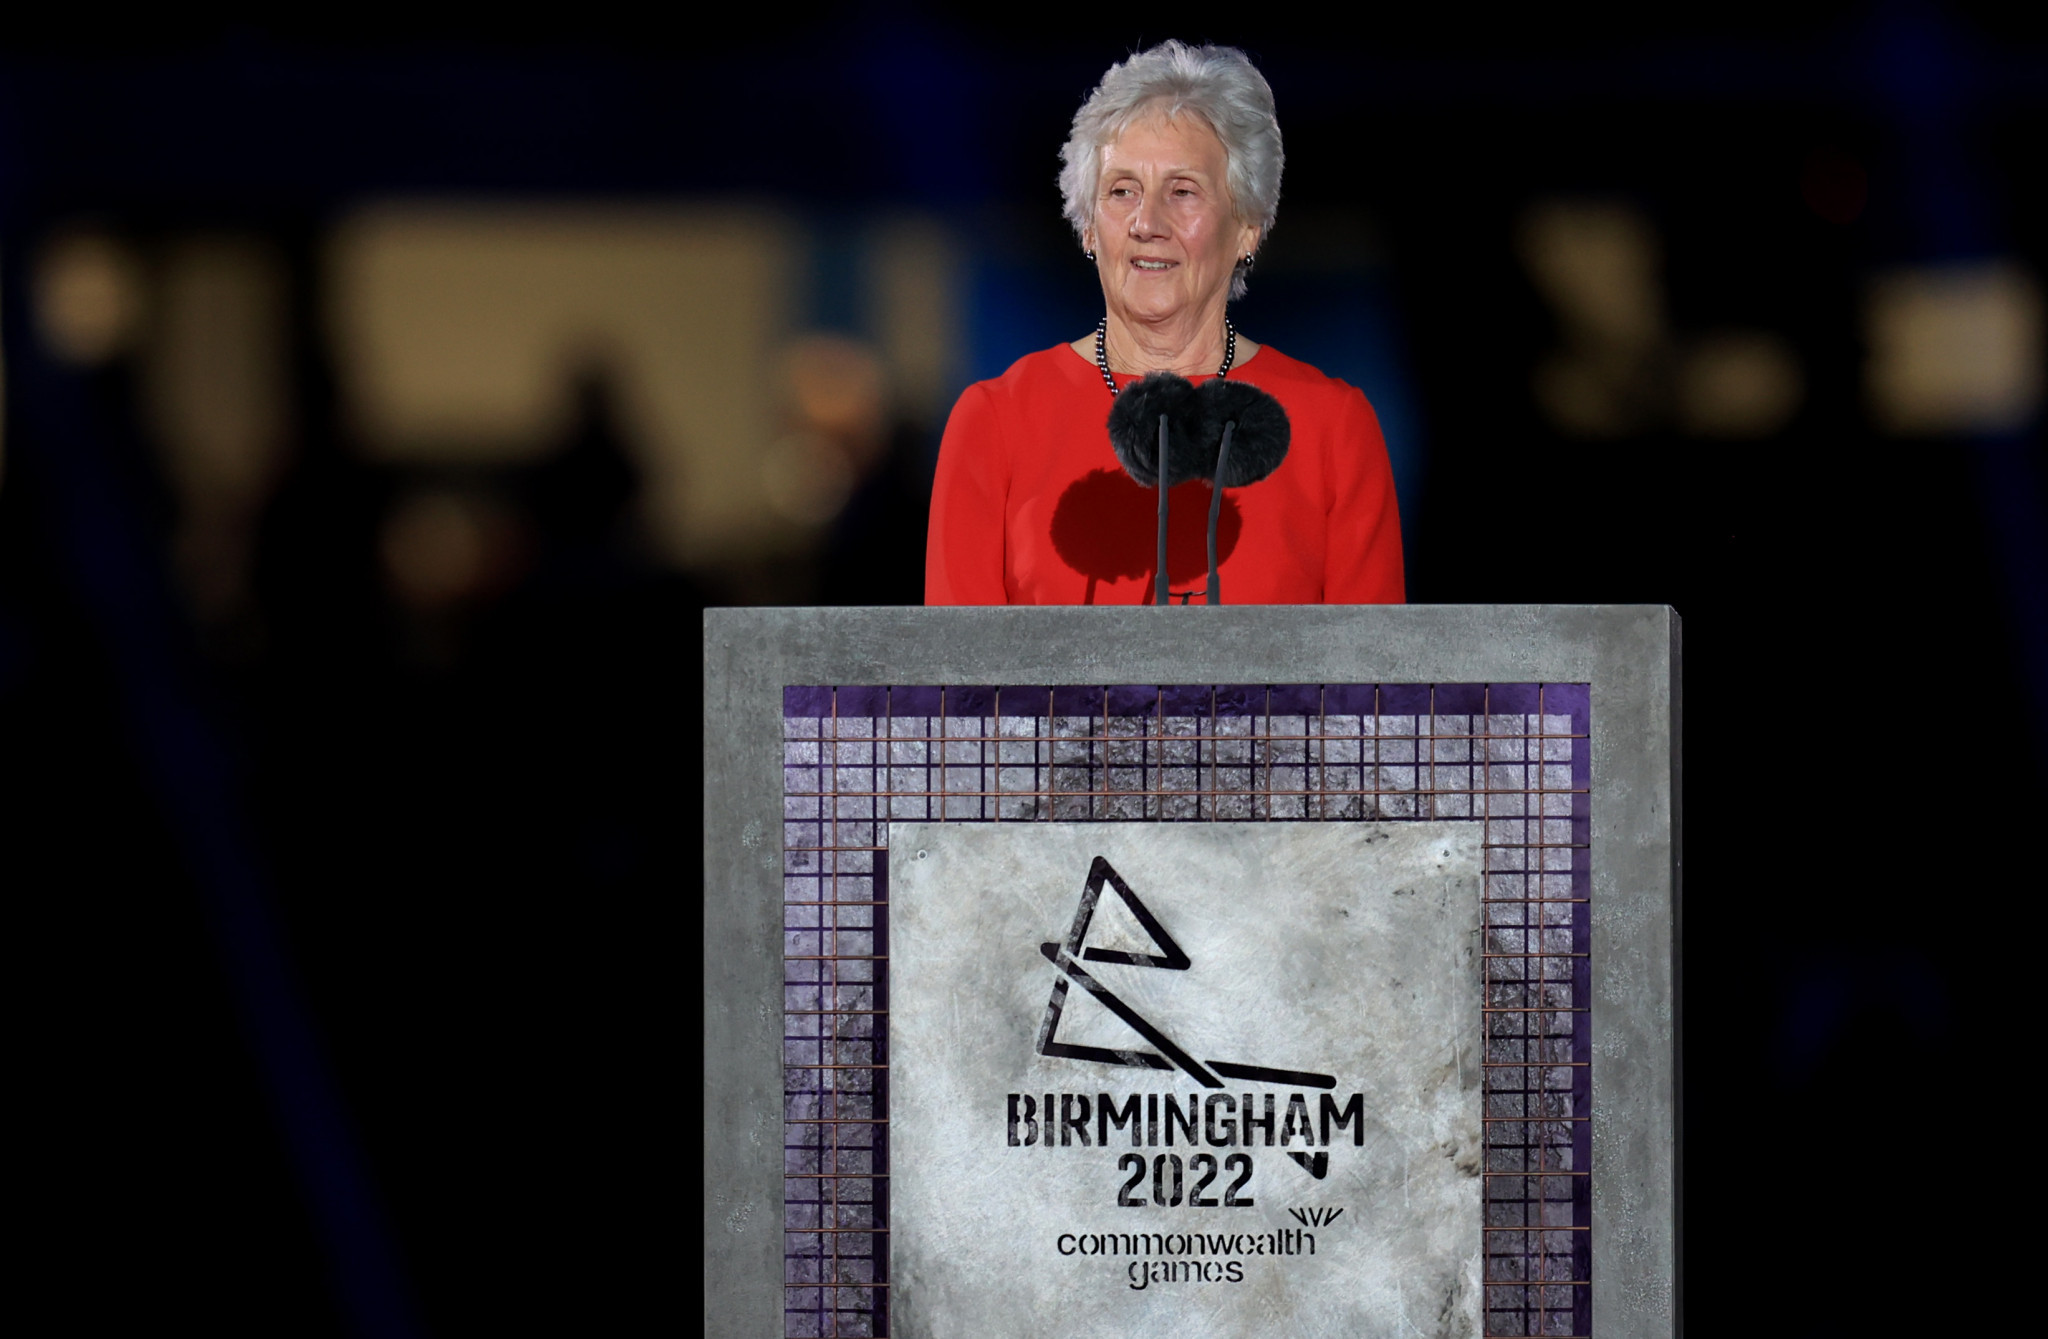 Dame Louise Martin has predicted that Trinbago 2023 will best promote the Commonwealth "Year of Youth" ©Getty Images